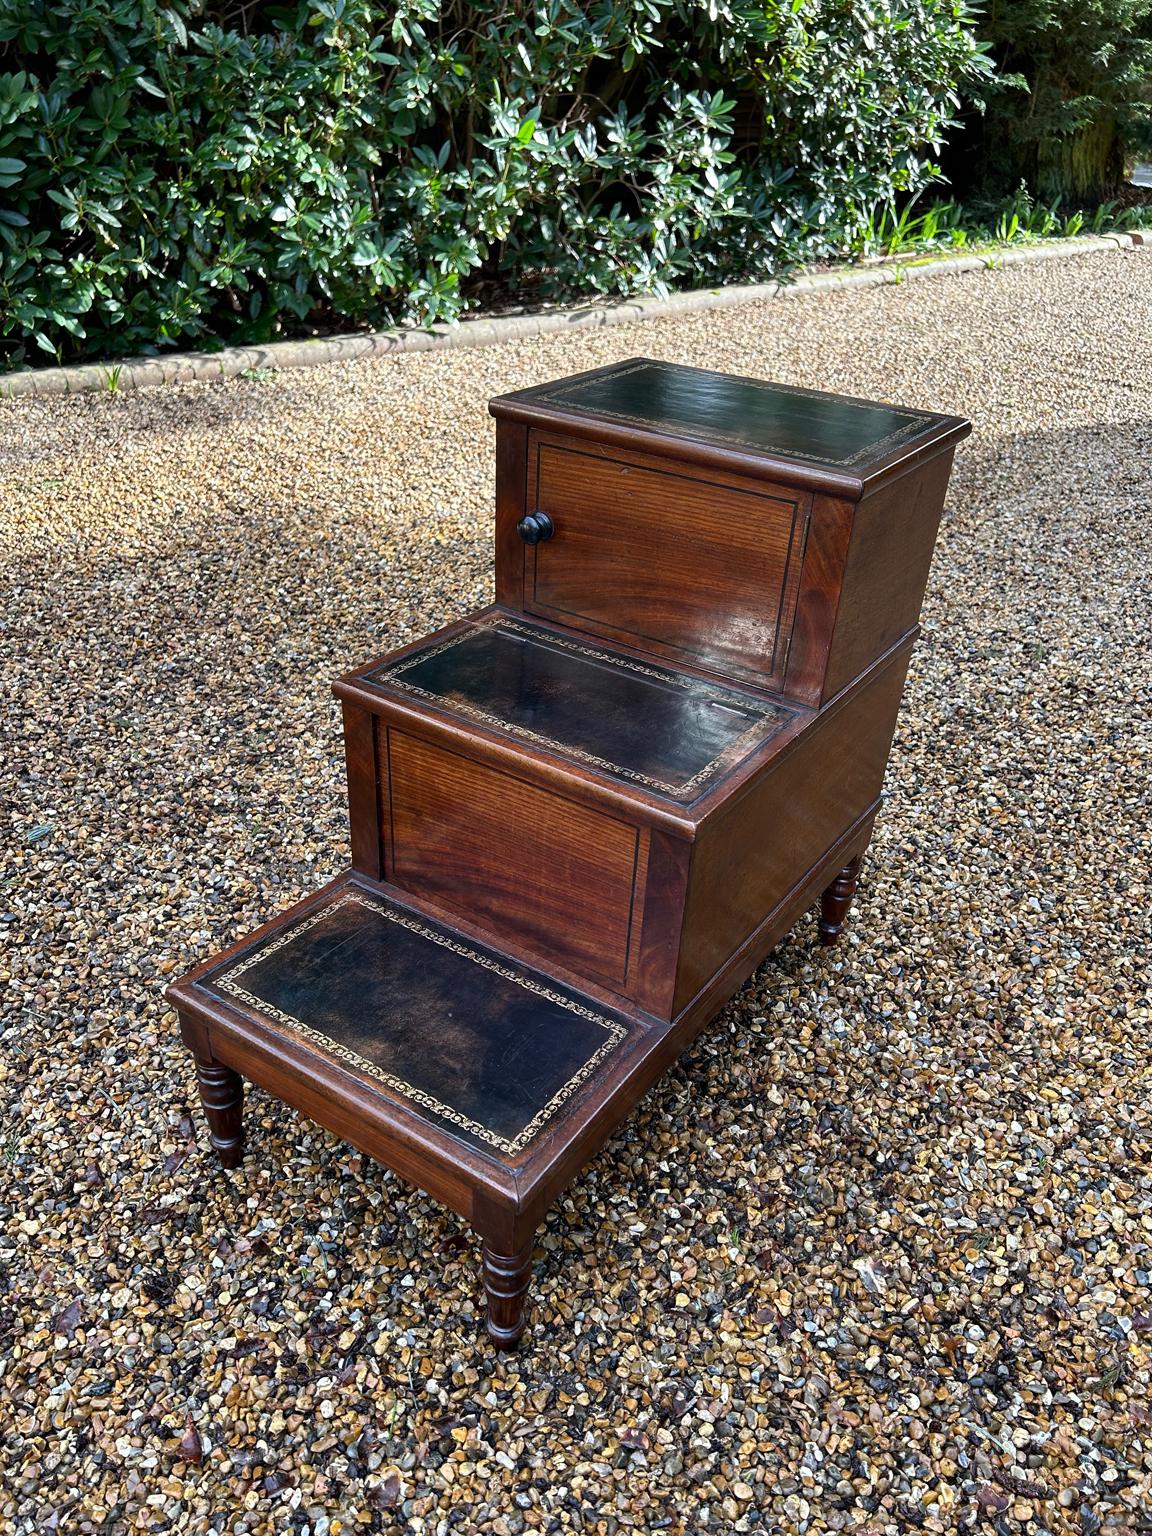 A very good quality 19th Century Mahogany Library / Bed Steps with three steps each finished in a dark leather with gold tooling. The top step with wooden turned knob opens to a small cupboard space, the middle step has a fitted cupboard inside, the